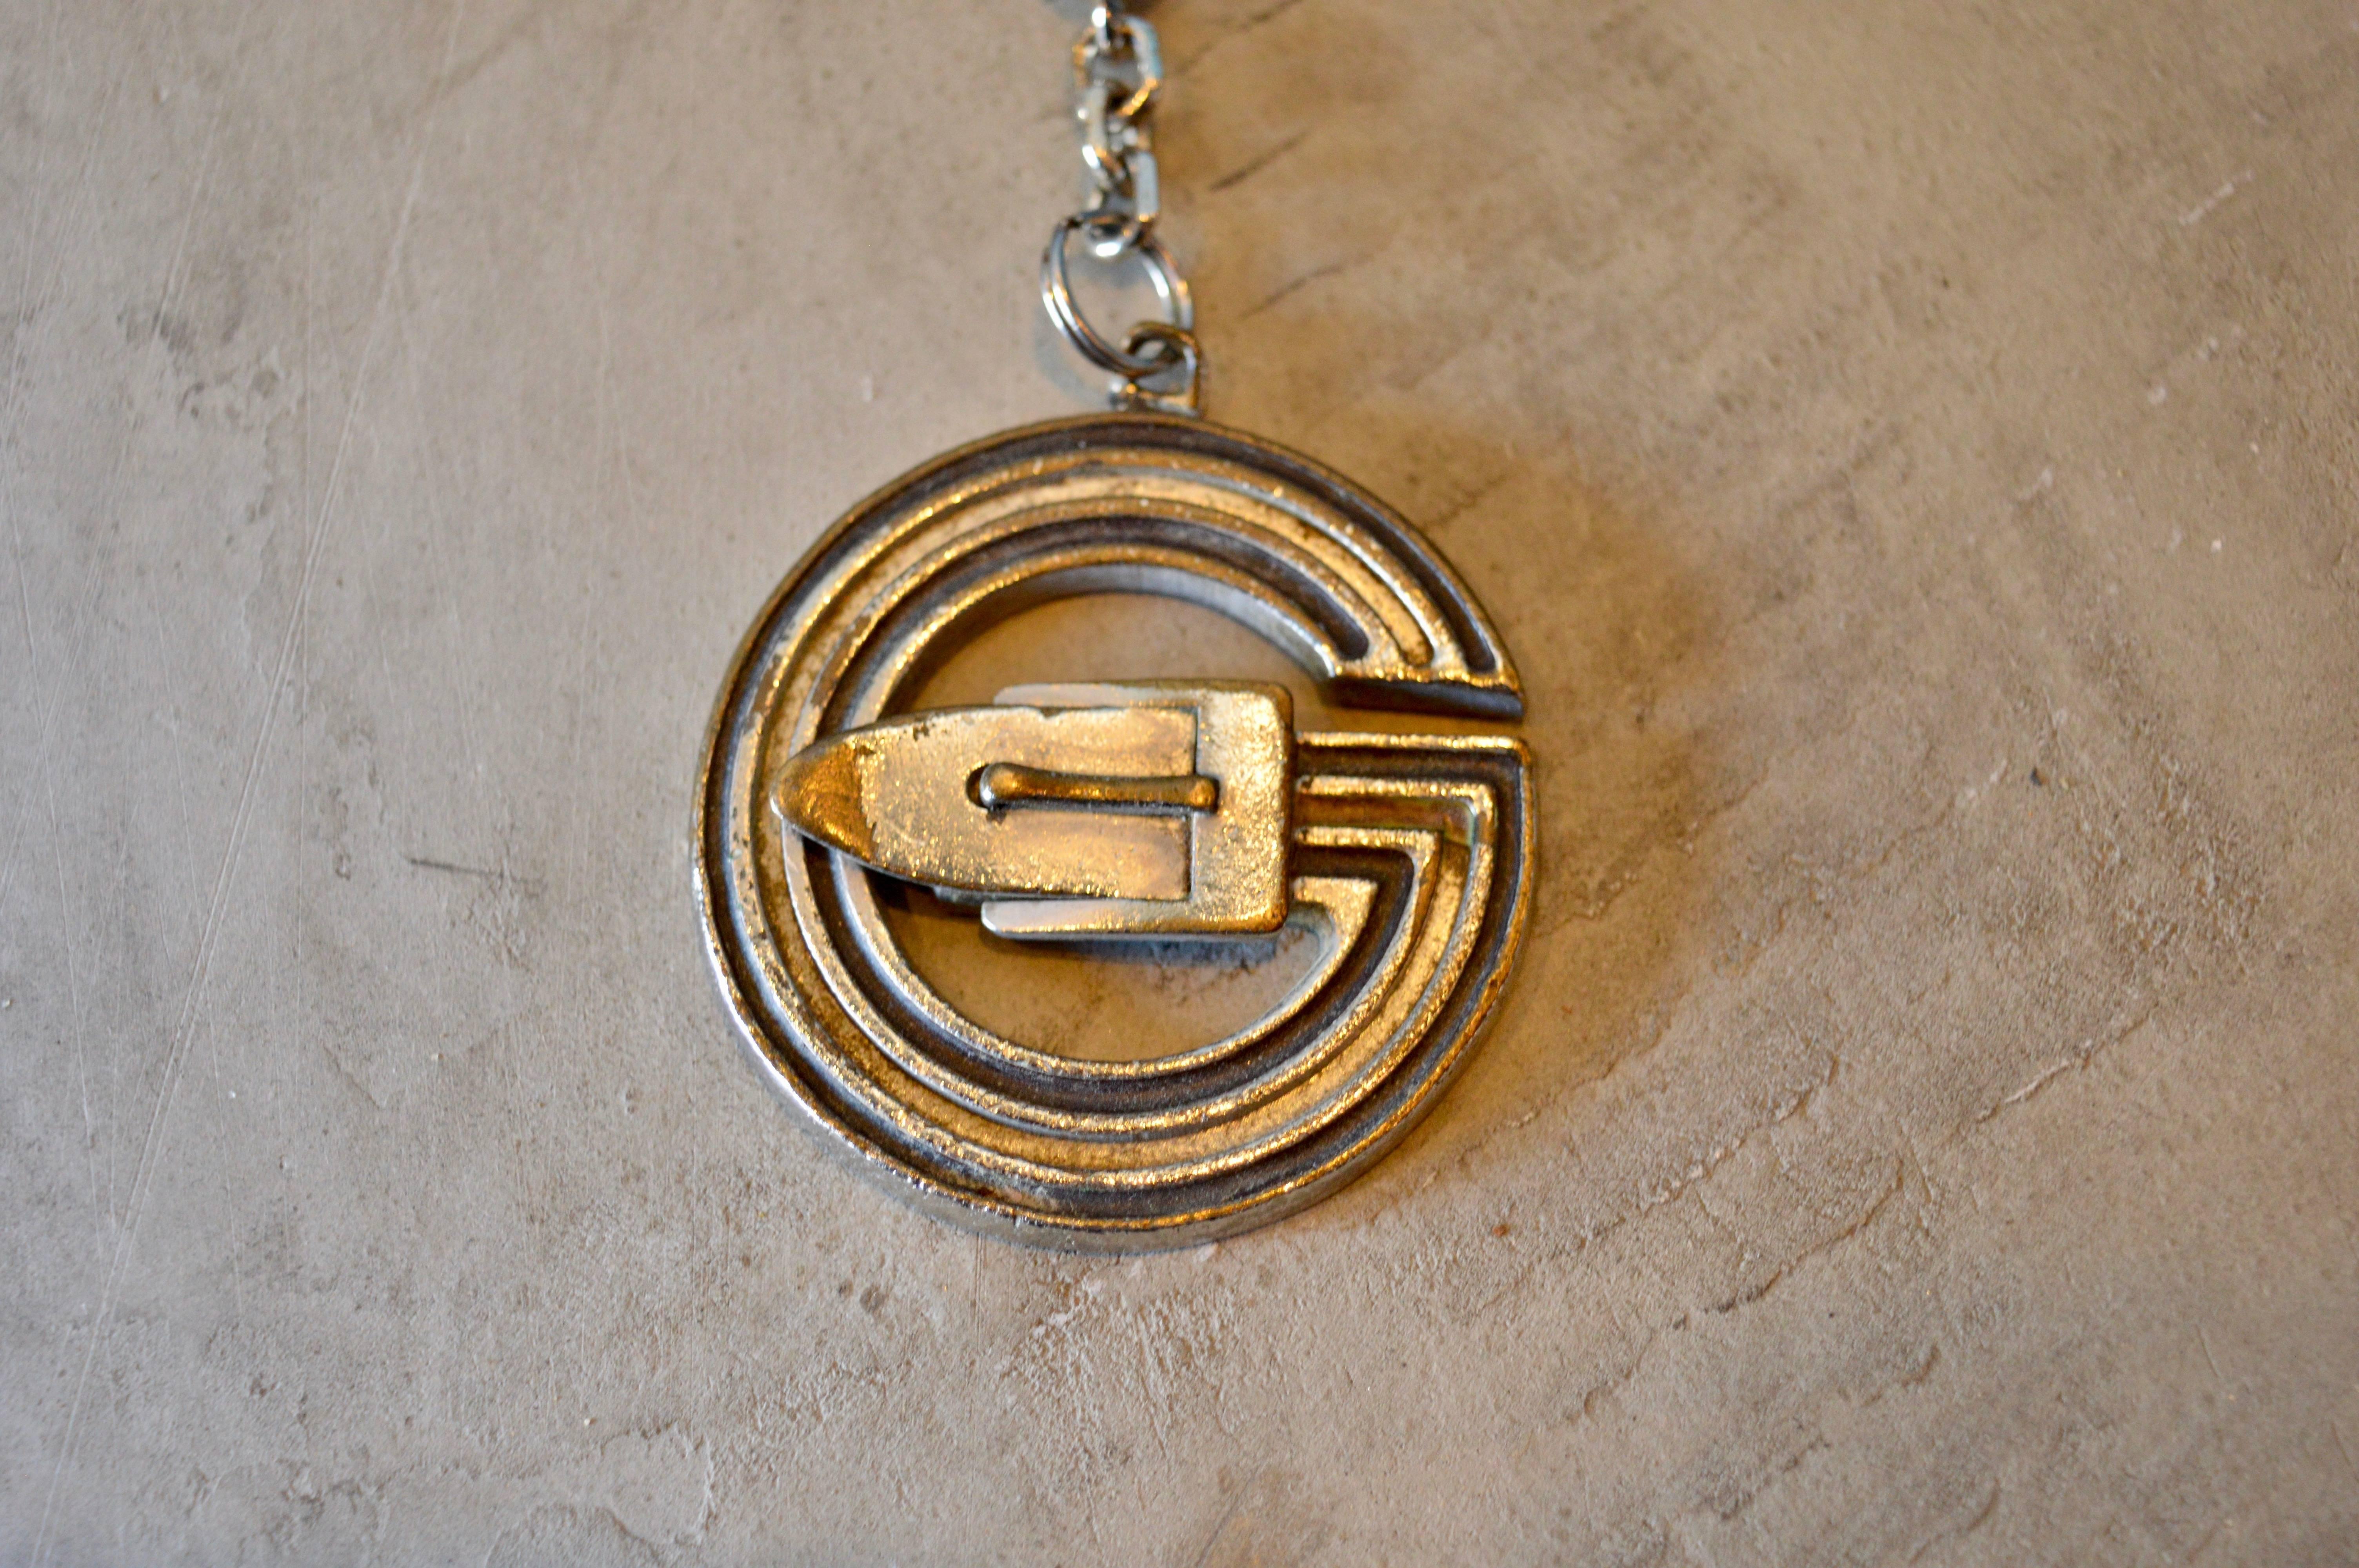 Cool vintage Gucci metal keychain. Great patina with large G - logo and belt buckle.